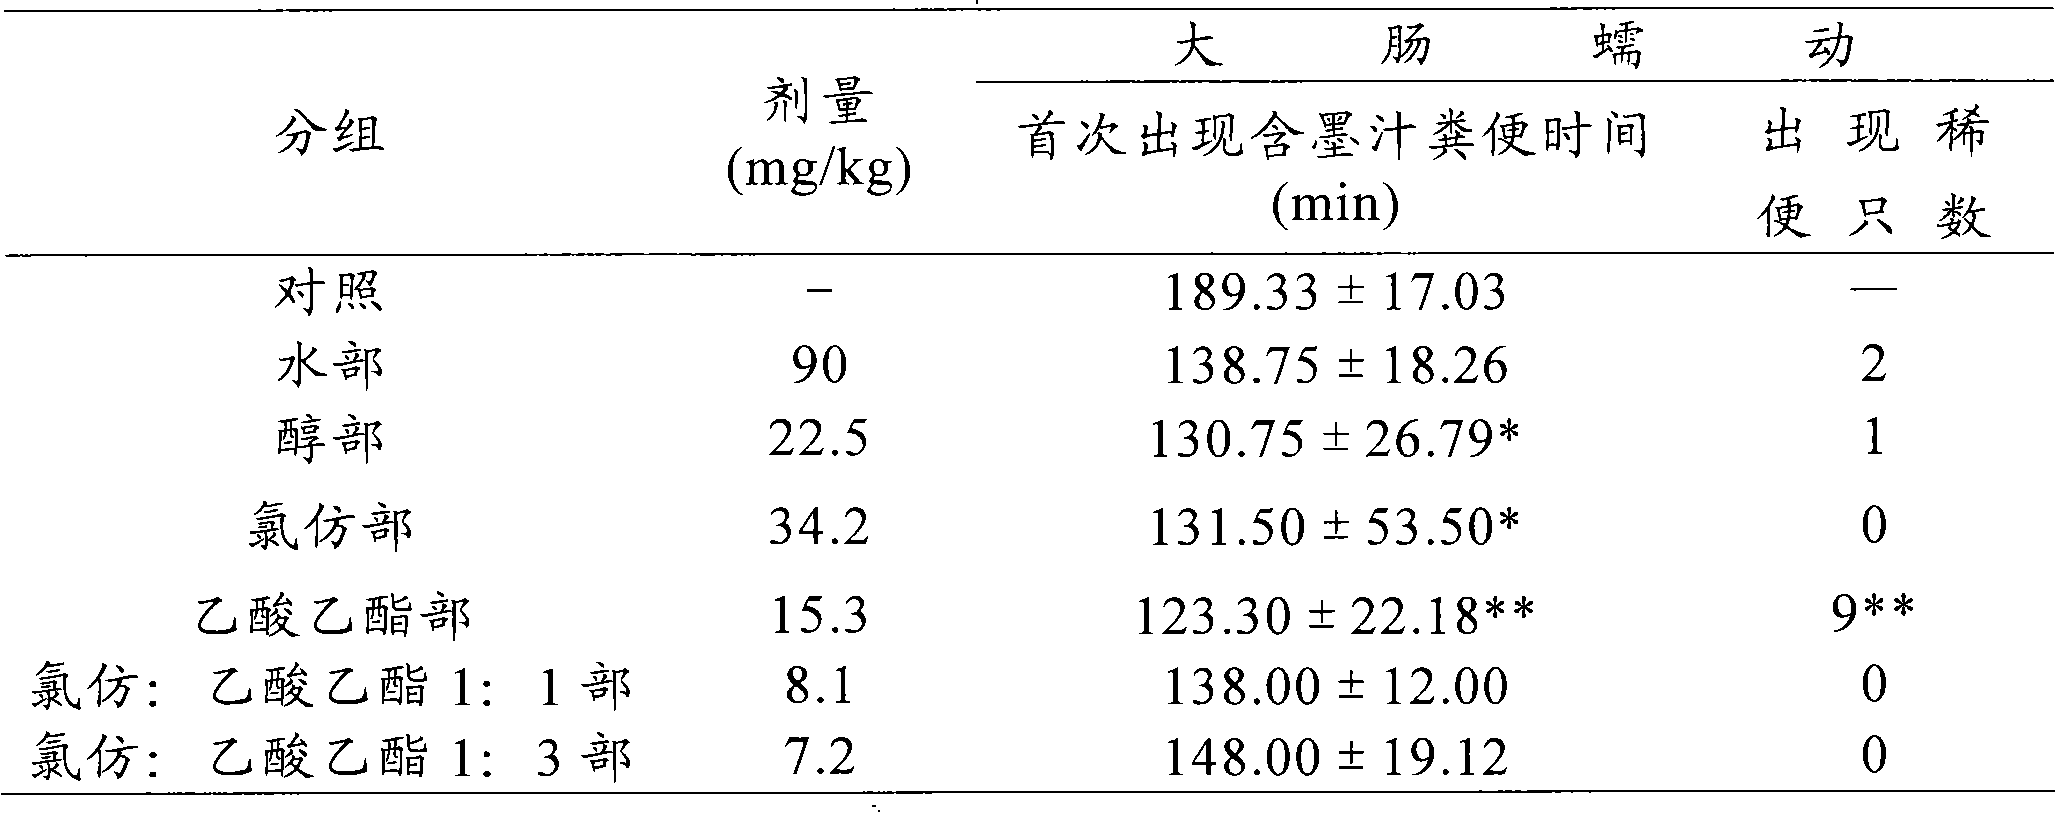 A kind of active extract of traditional Chinese medicine with alcohol-abstaining effect, its preparation method and application